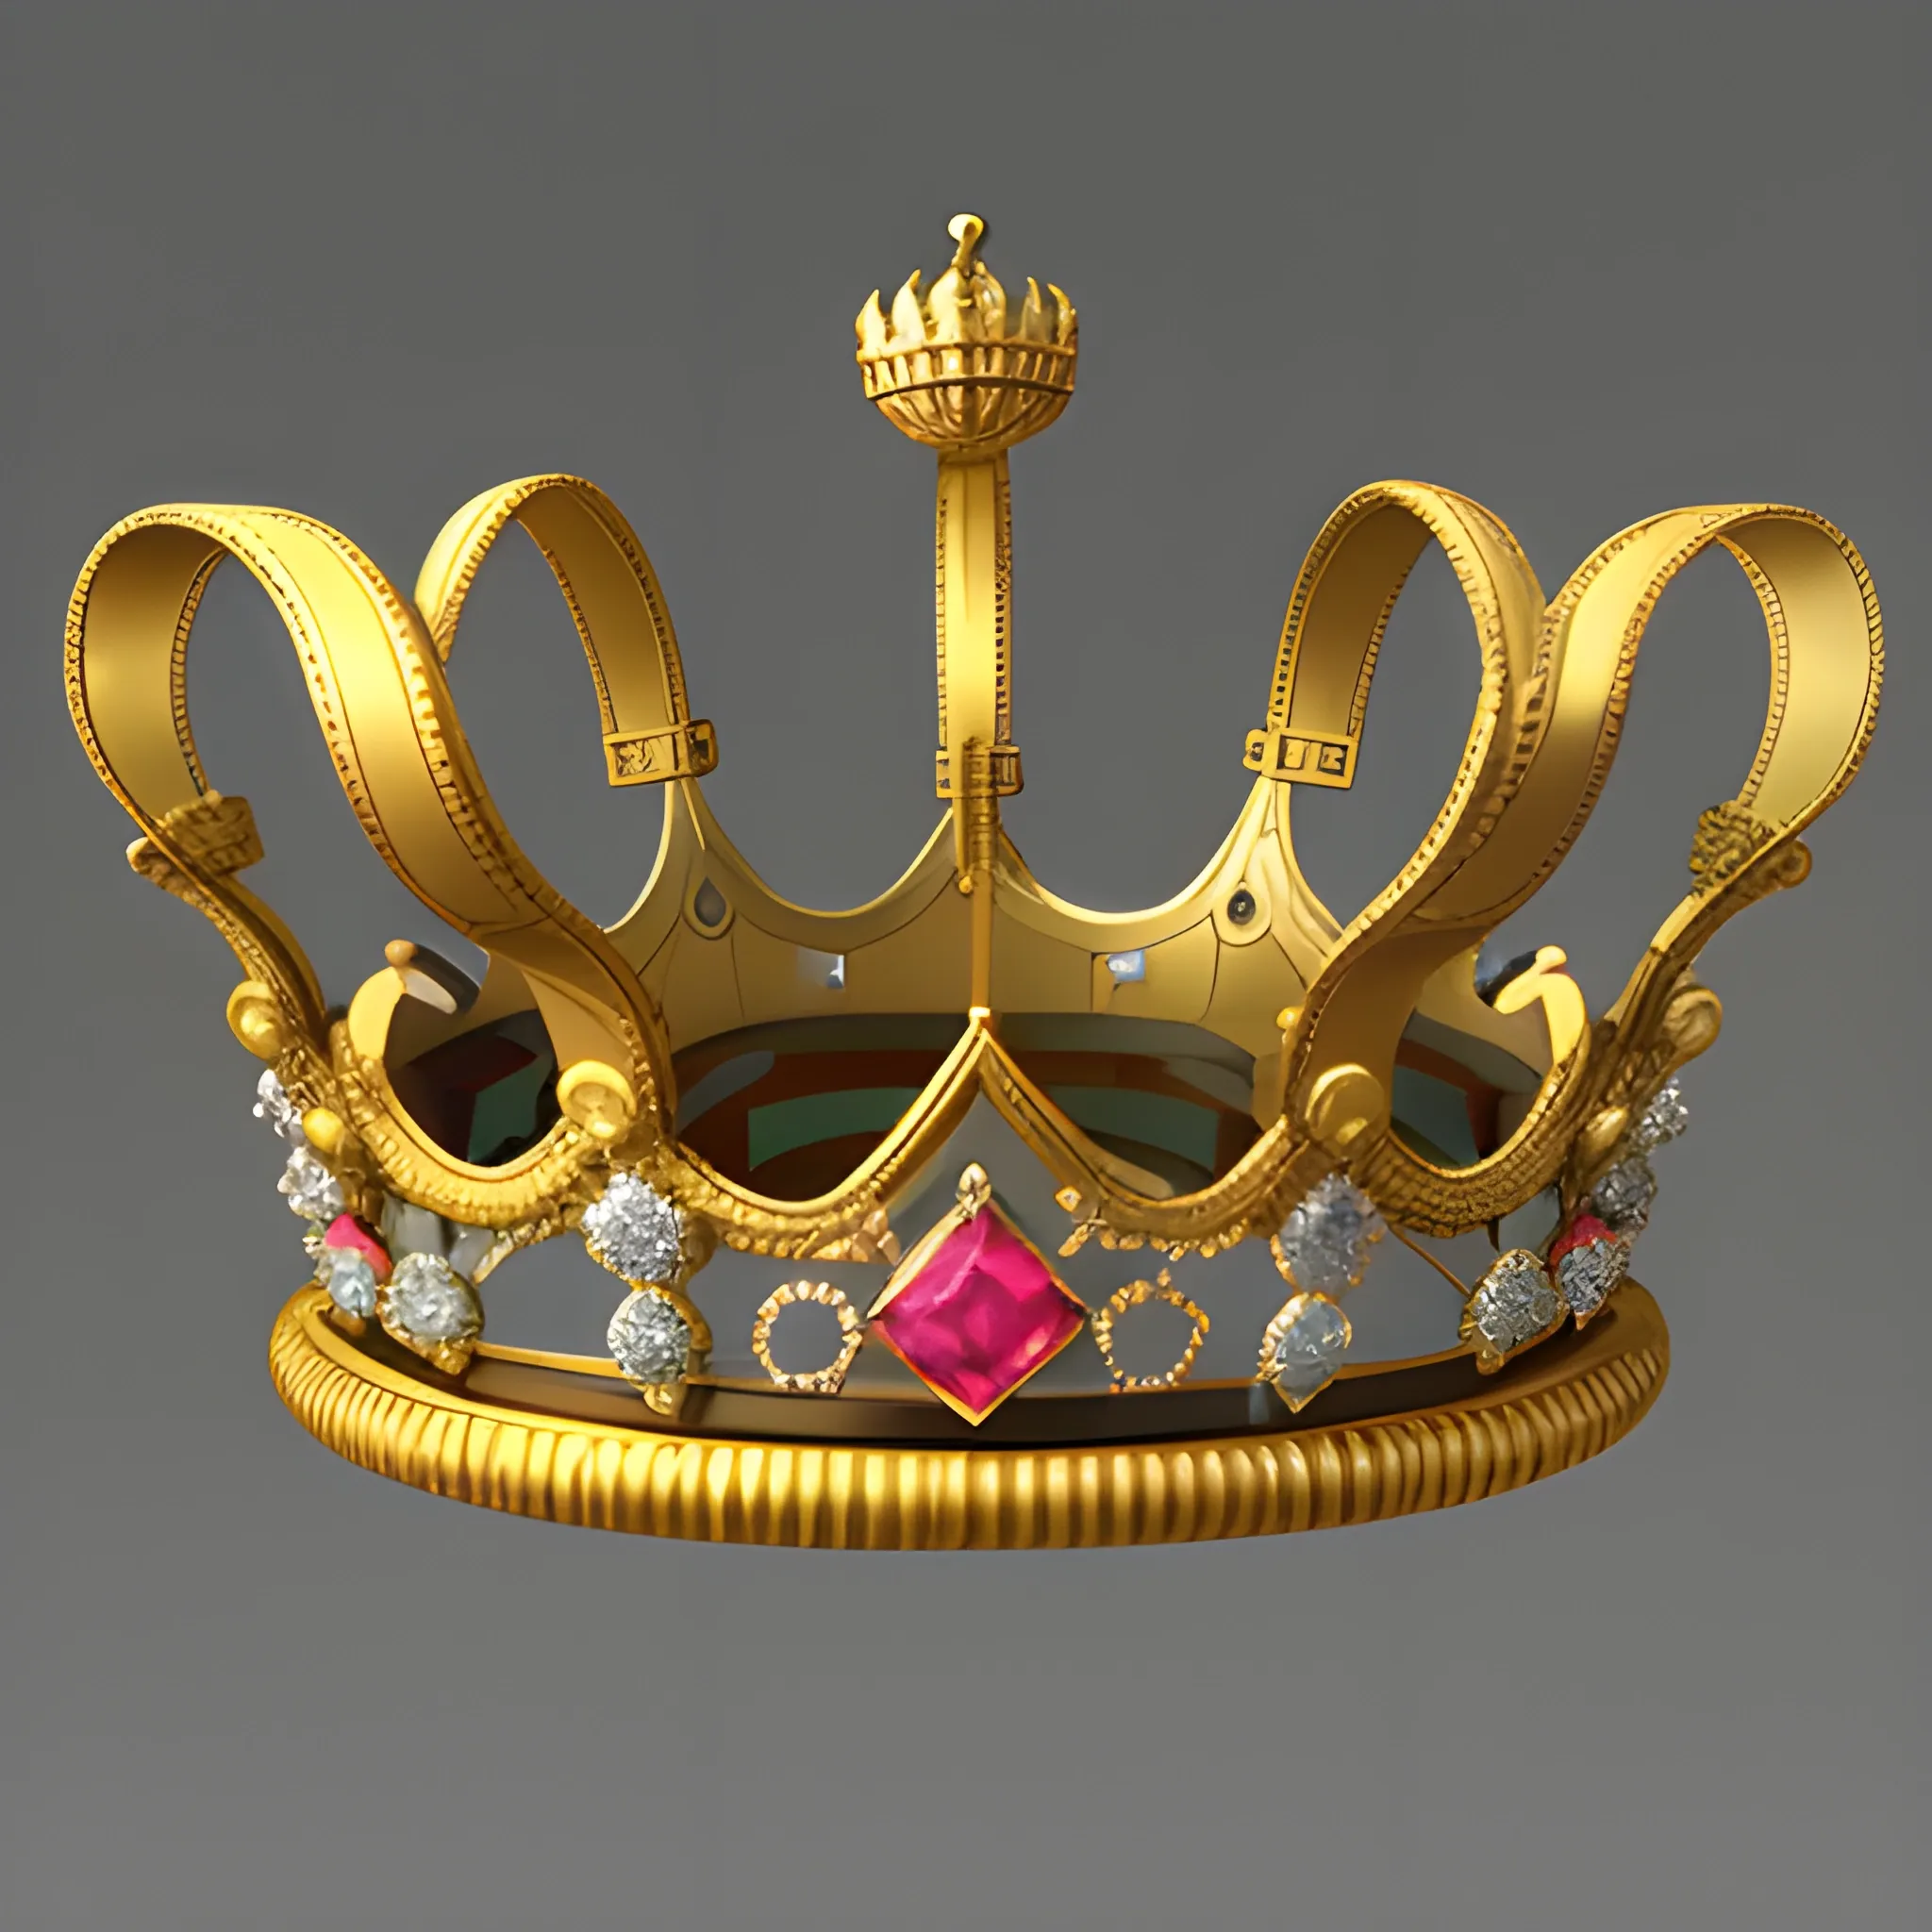 aplomb with crown on the latter a, 3D